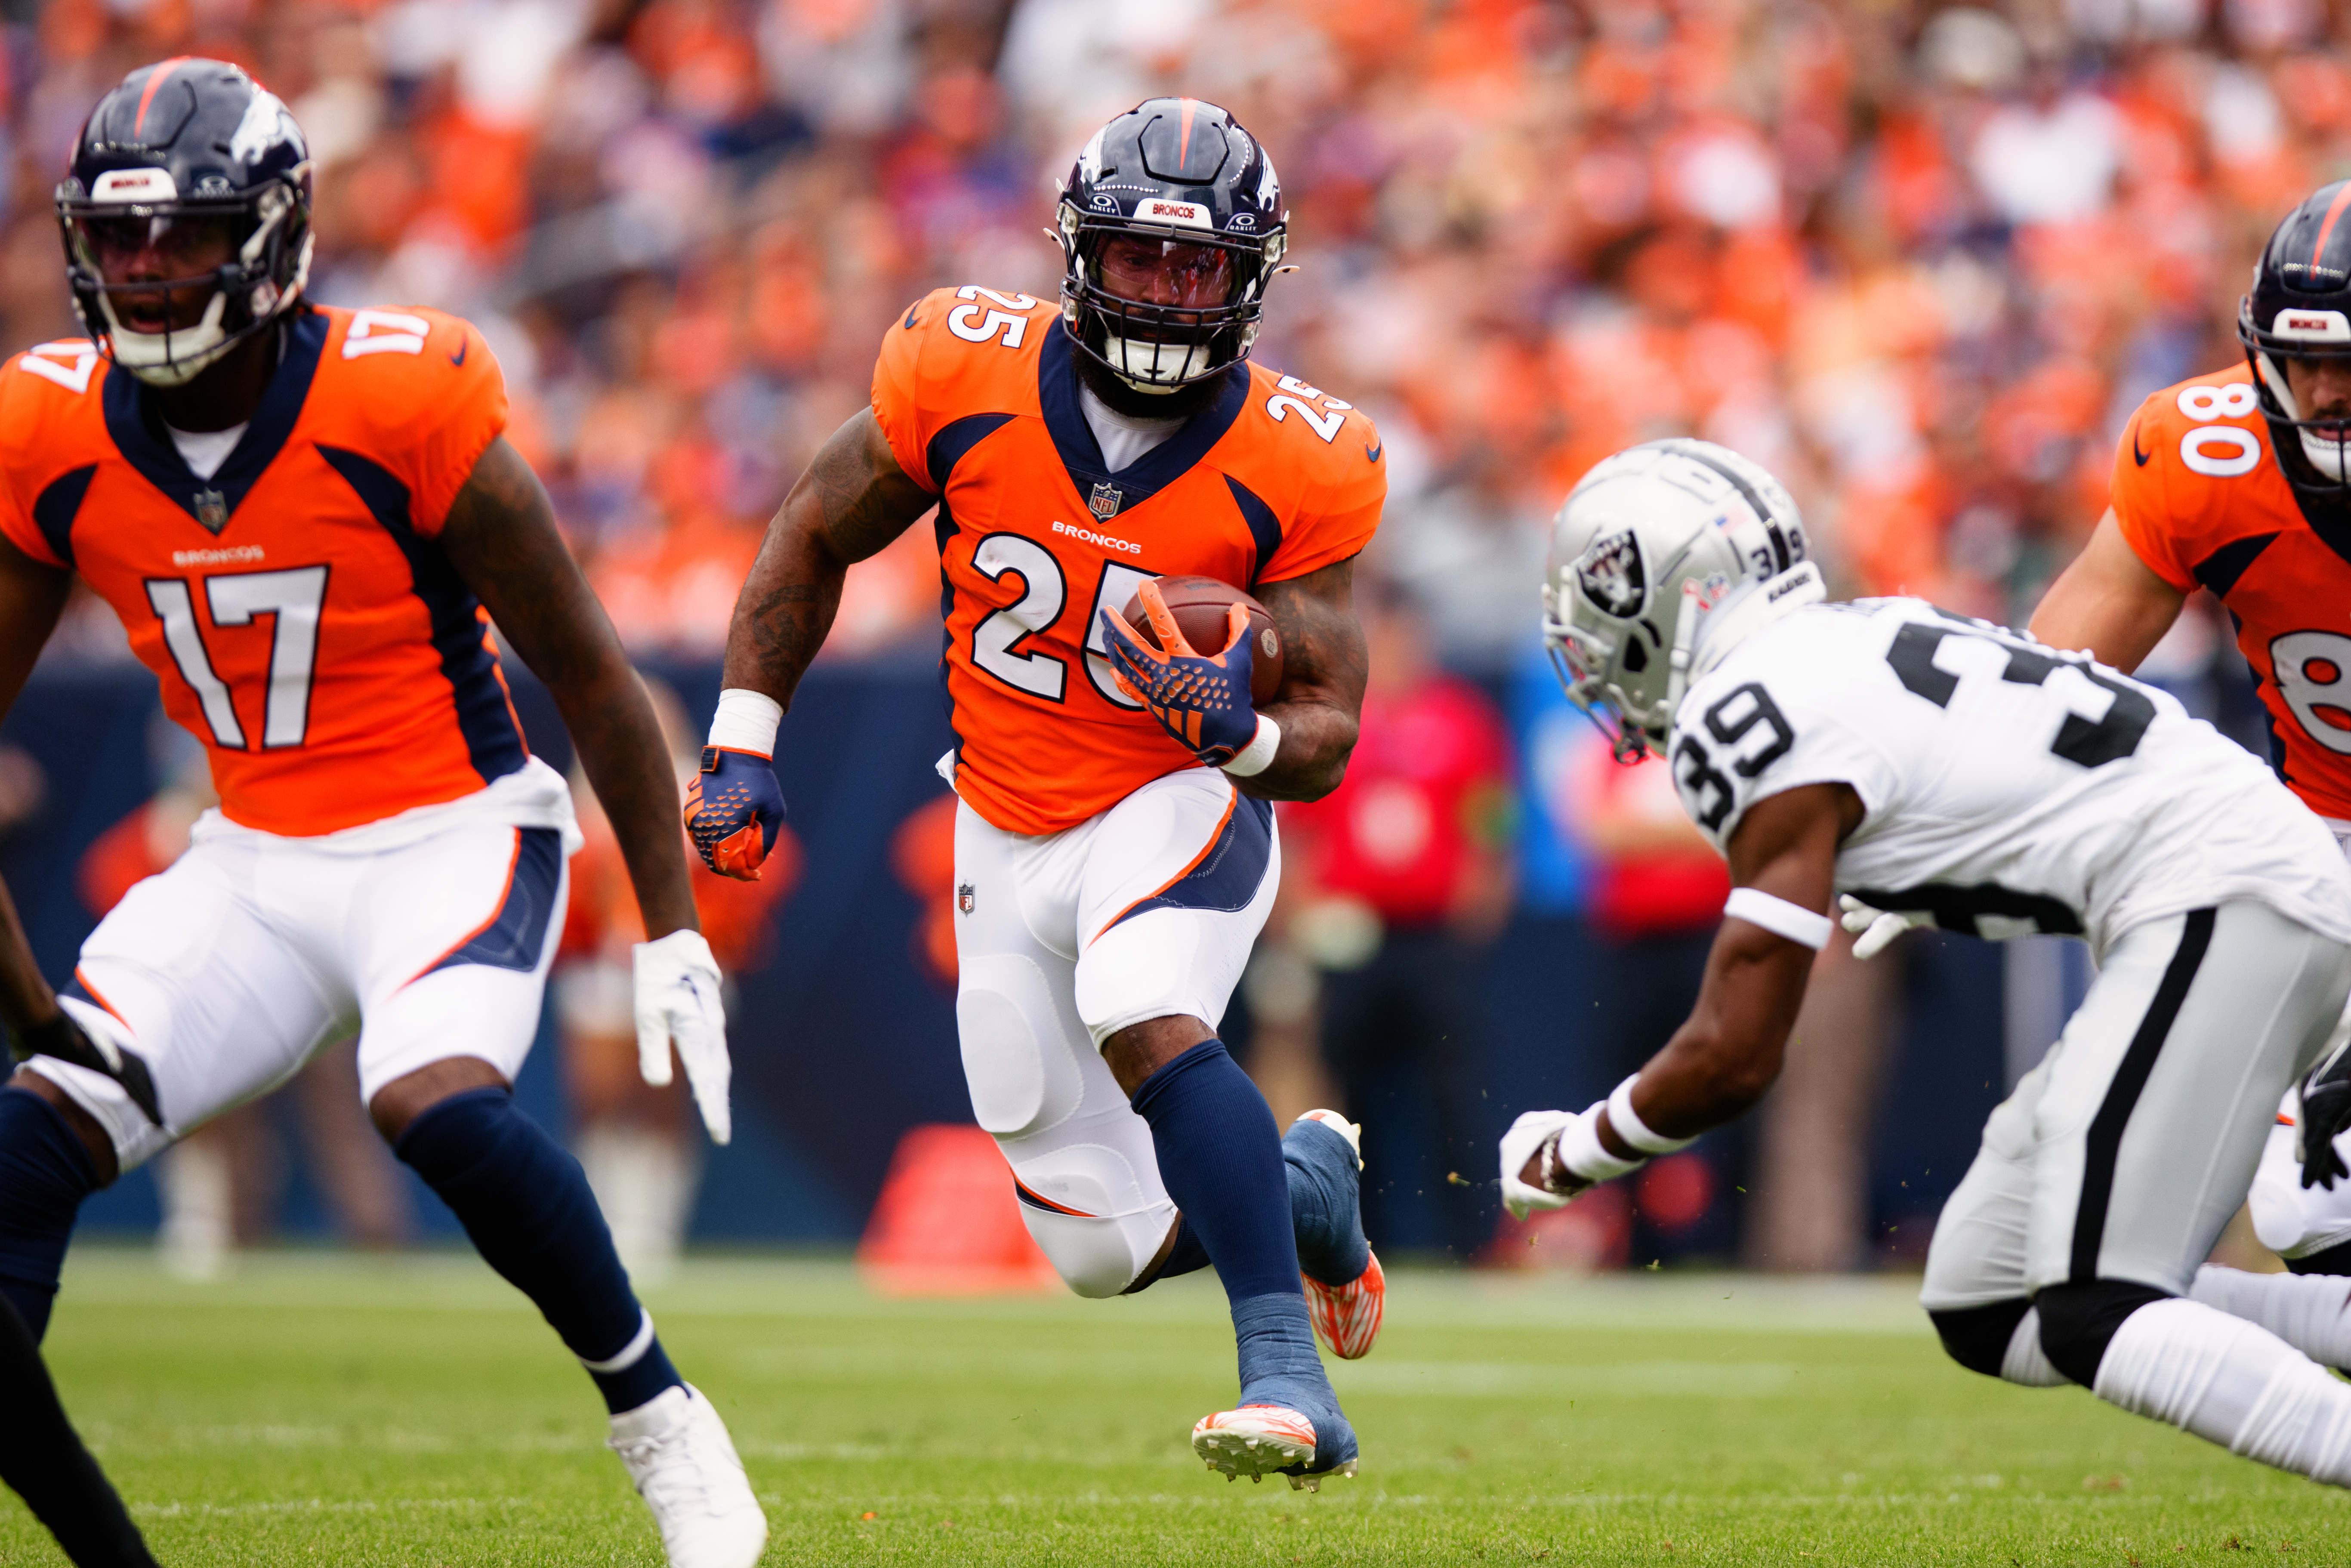 Running back Samaje Perine of the Denver Broncos runs with the football during the first quarter against the Las Vegas Raiders at Empower Field at Mile High on September 10, 2023 in Denver, Colorado.